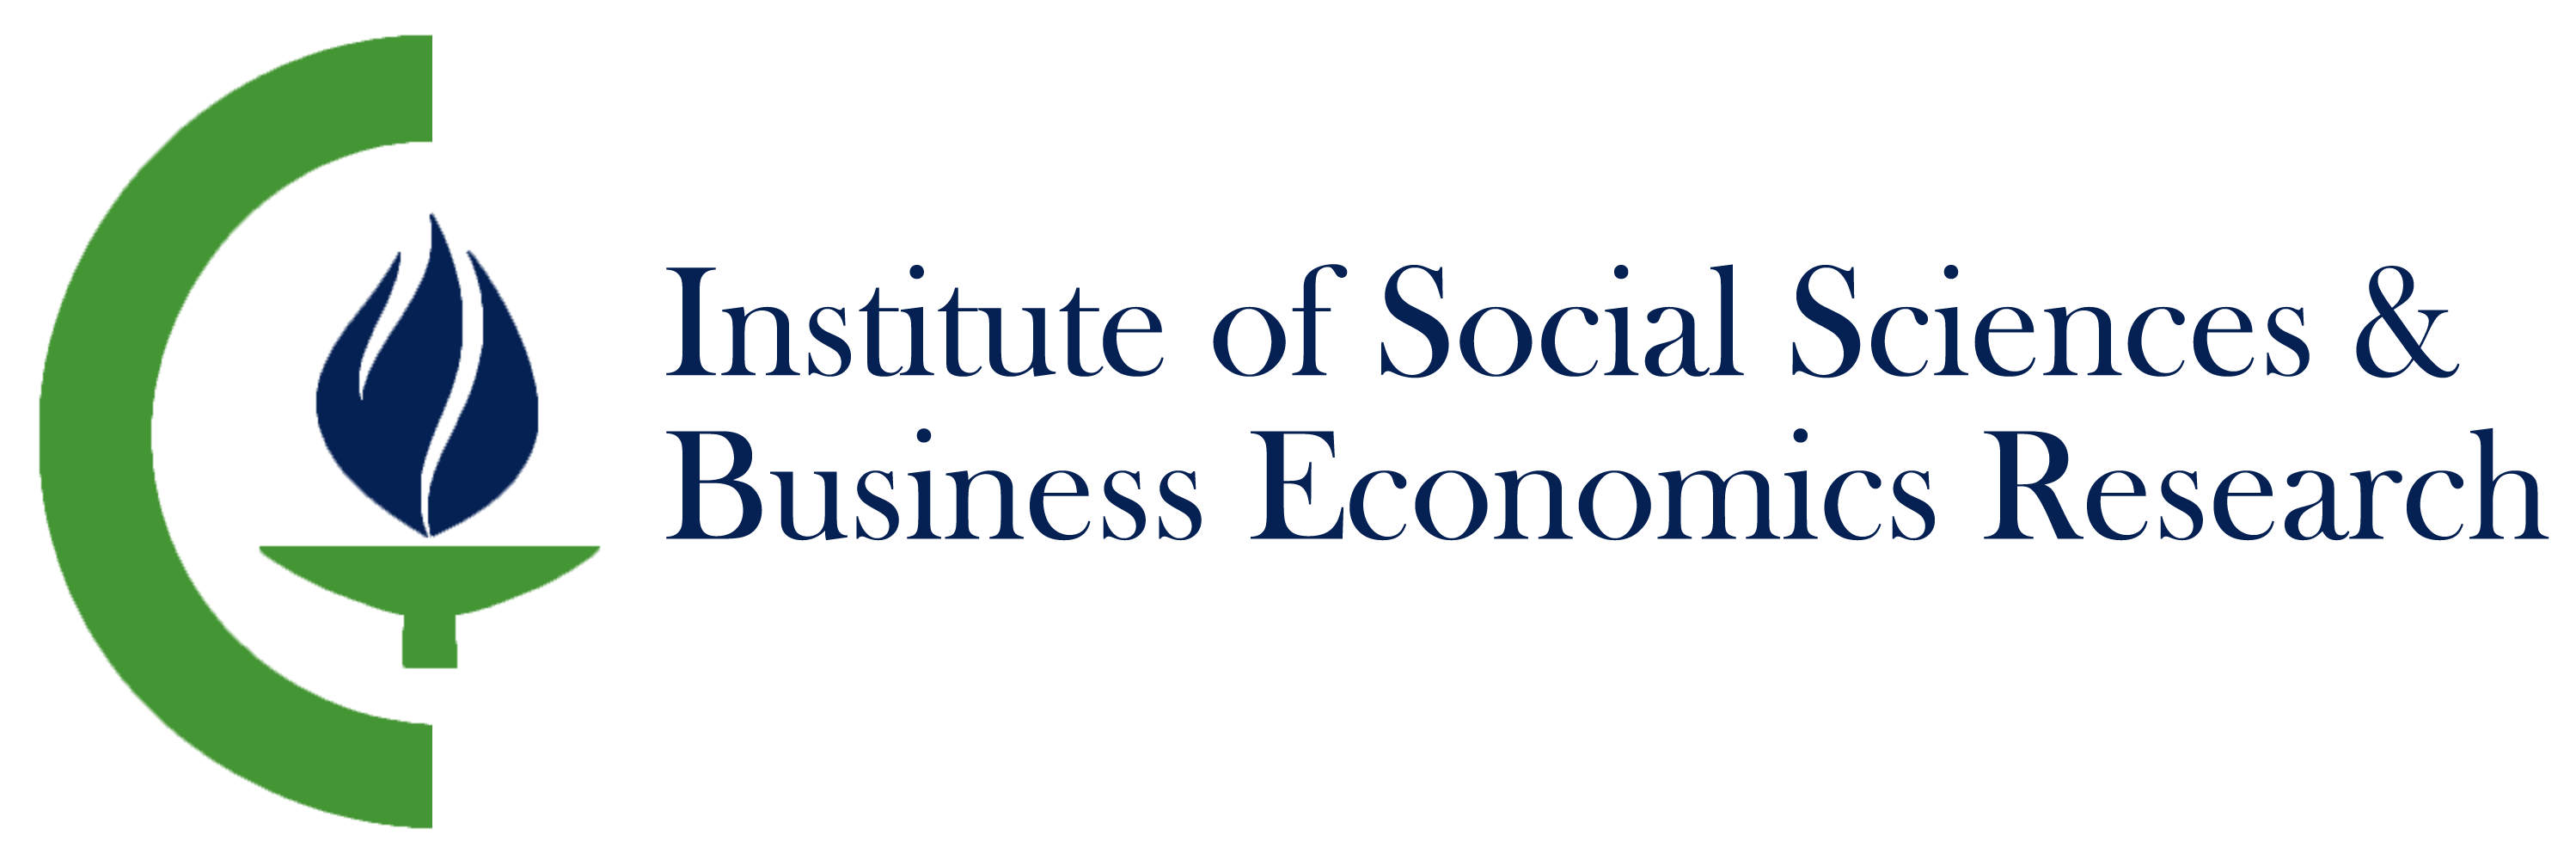 ISBER International Conference on Current Research in Humanities, Social Sciences, Business Management & Economics (CHSBE)